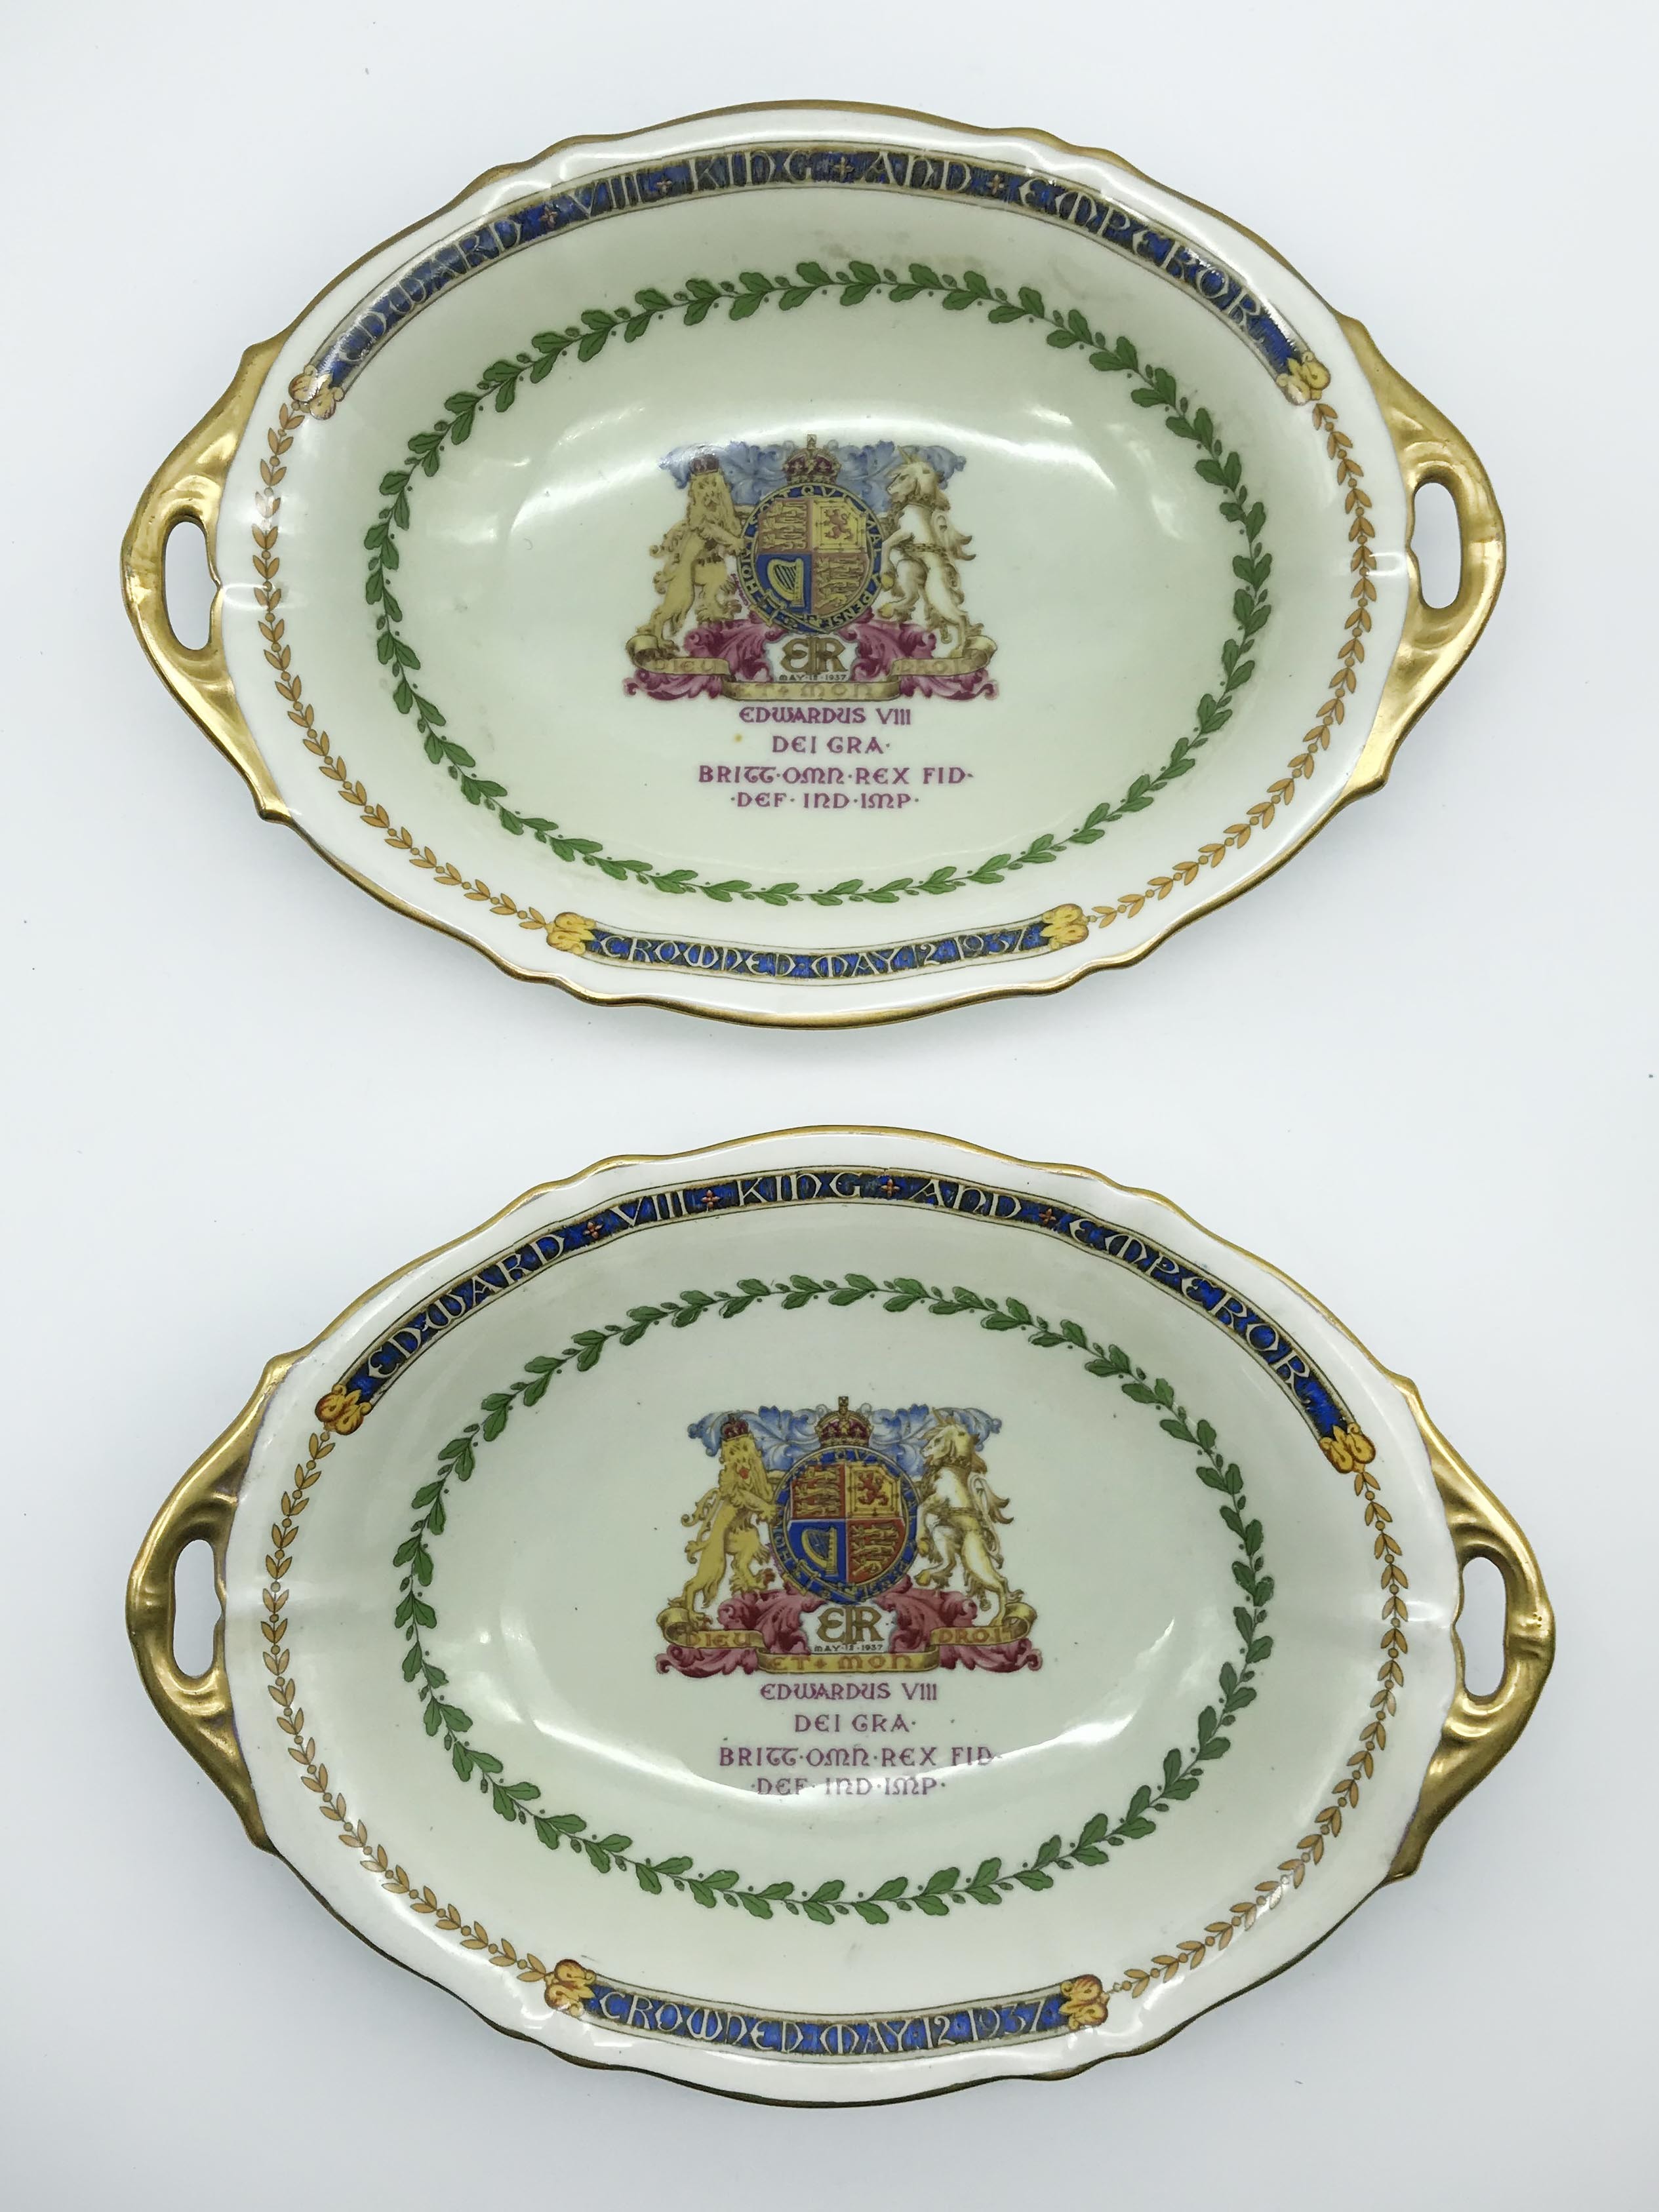 1937 TWO PERPETUAL SOUVENIR IN PARAGON CHINA TO COMMEMORATE THE CORONATION OF H.M. KING EDWARD VIII - Image 2 of 5